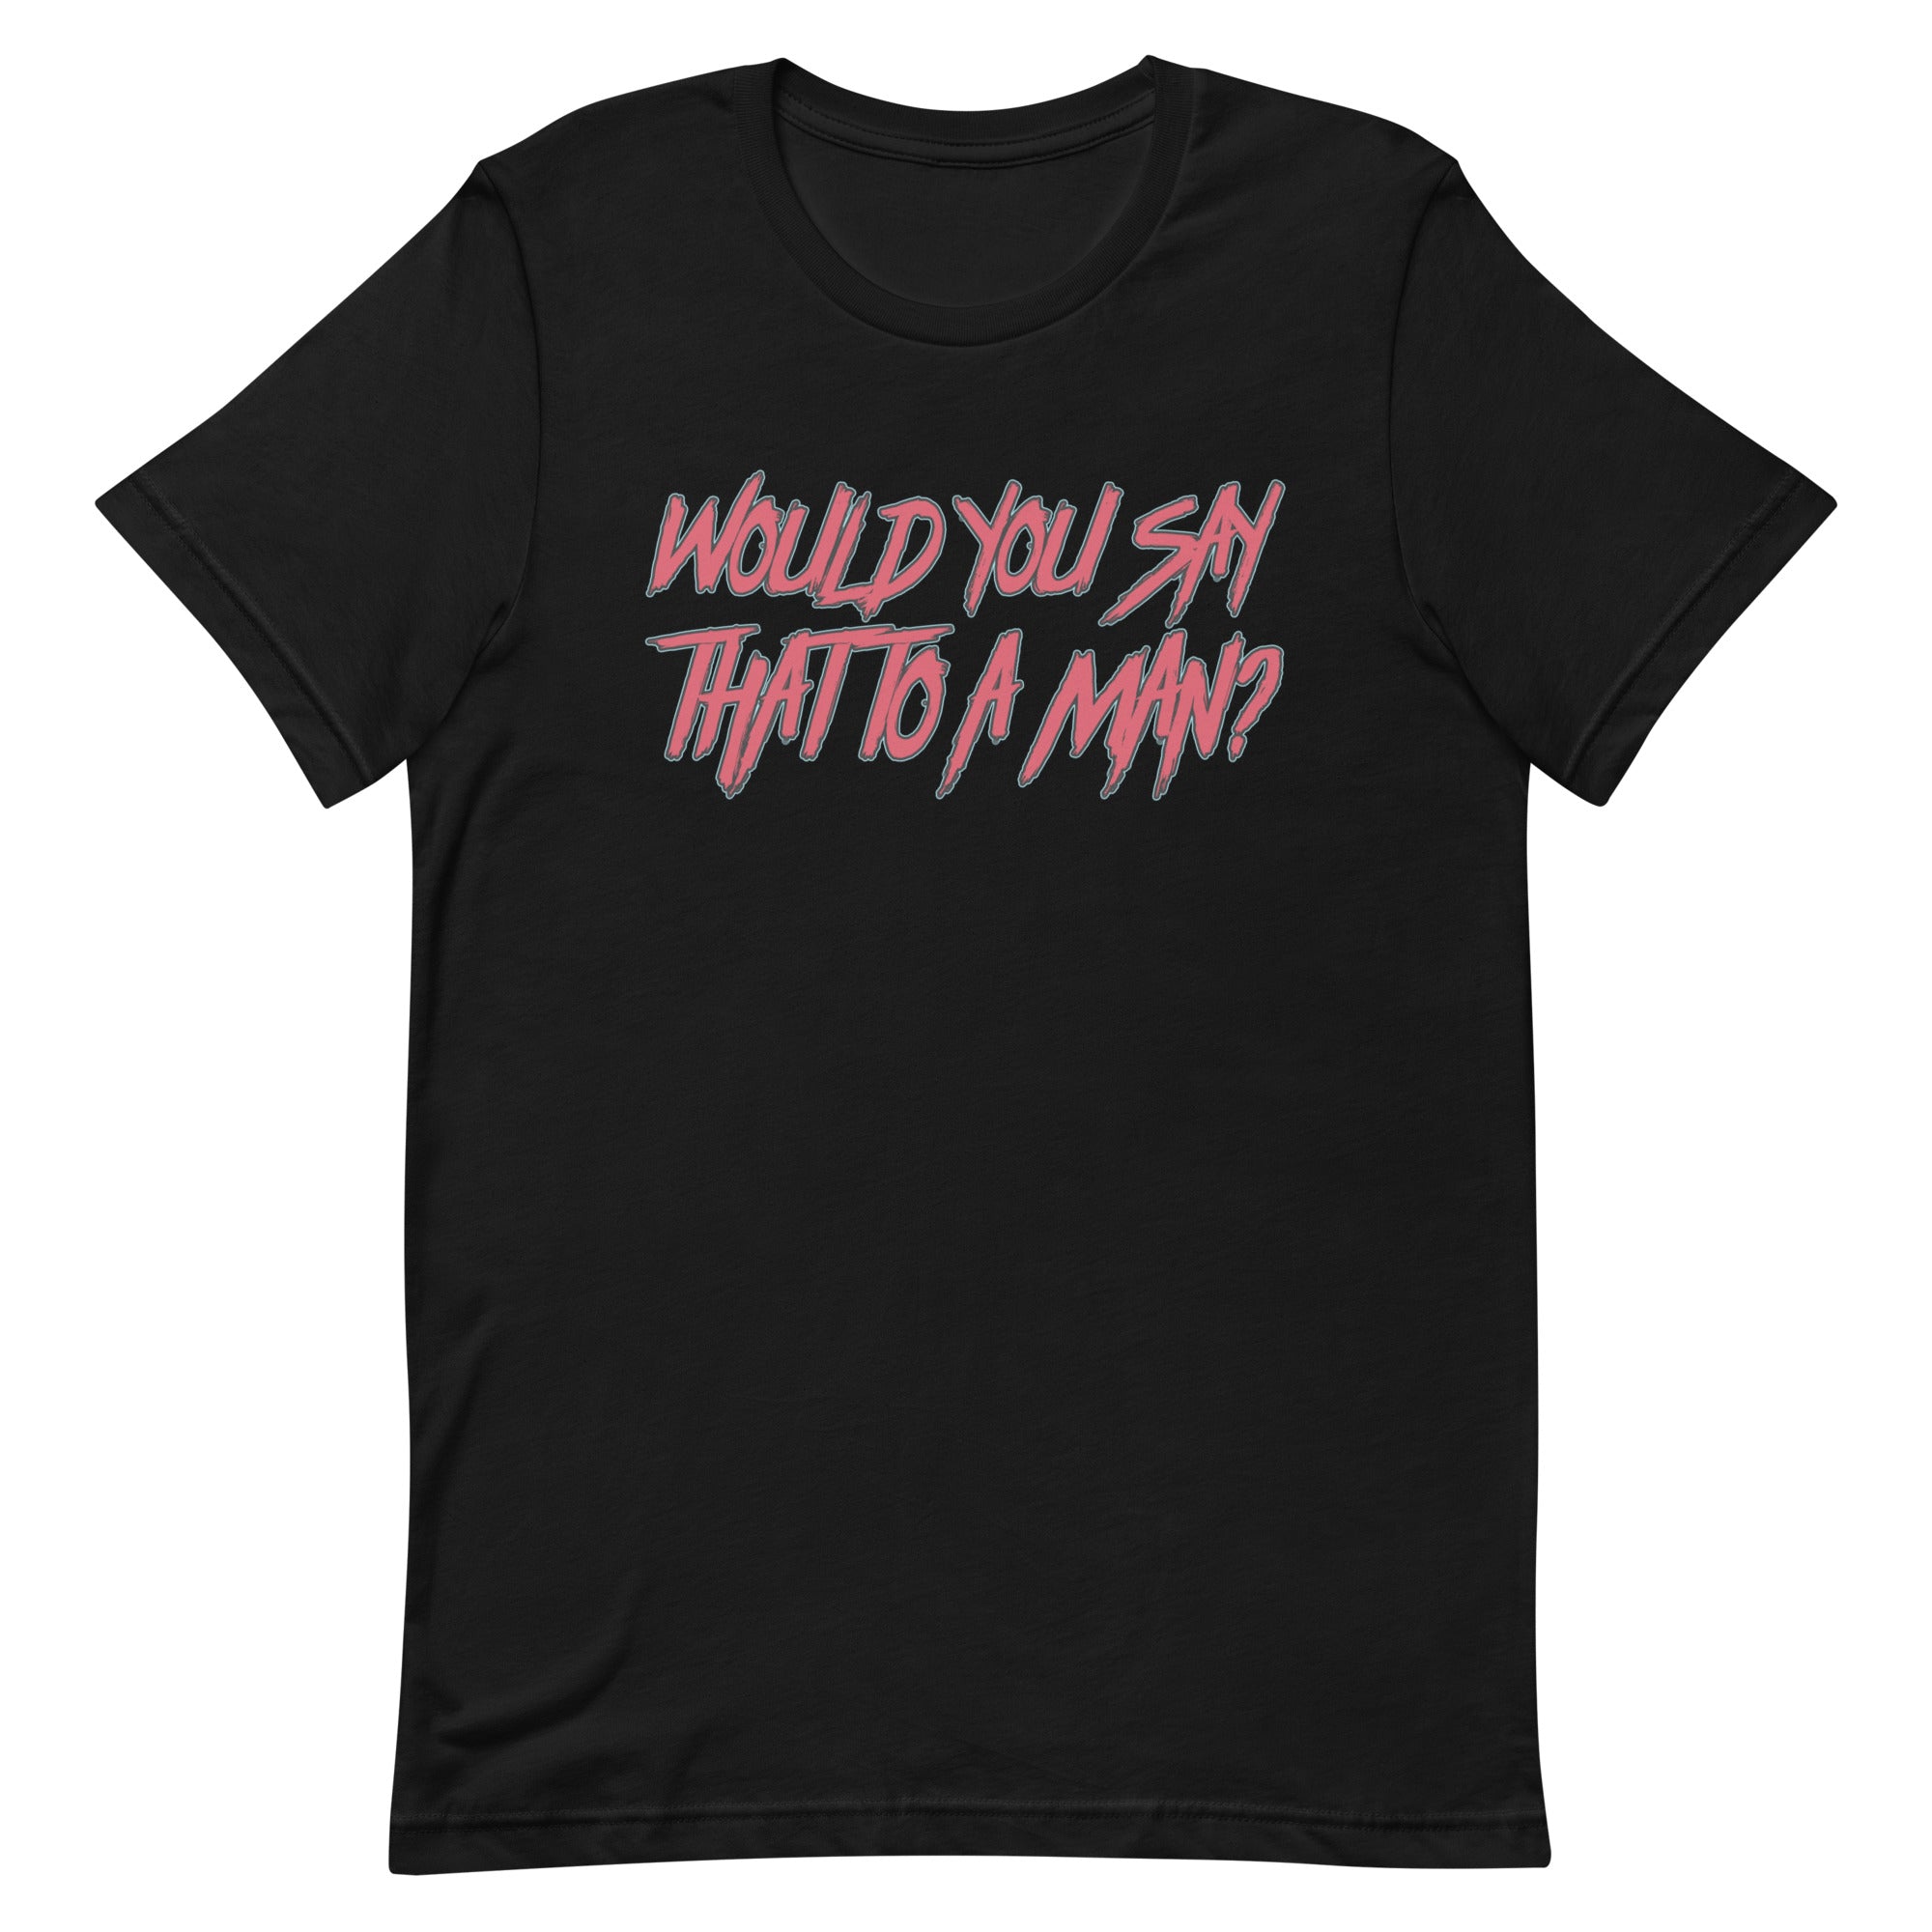 Would You Say That To A Man? Unisex t-shirt